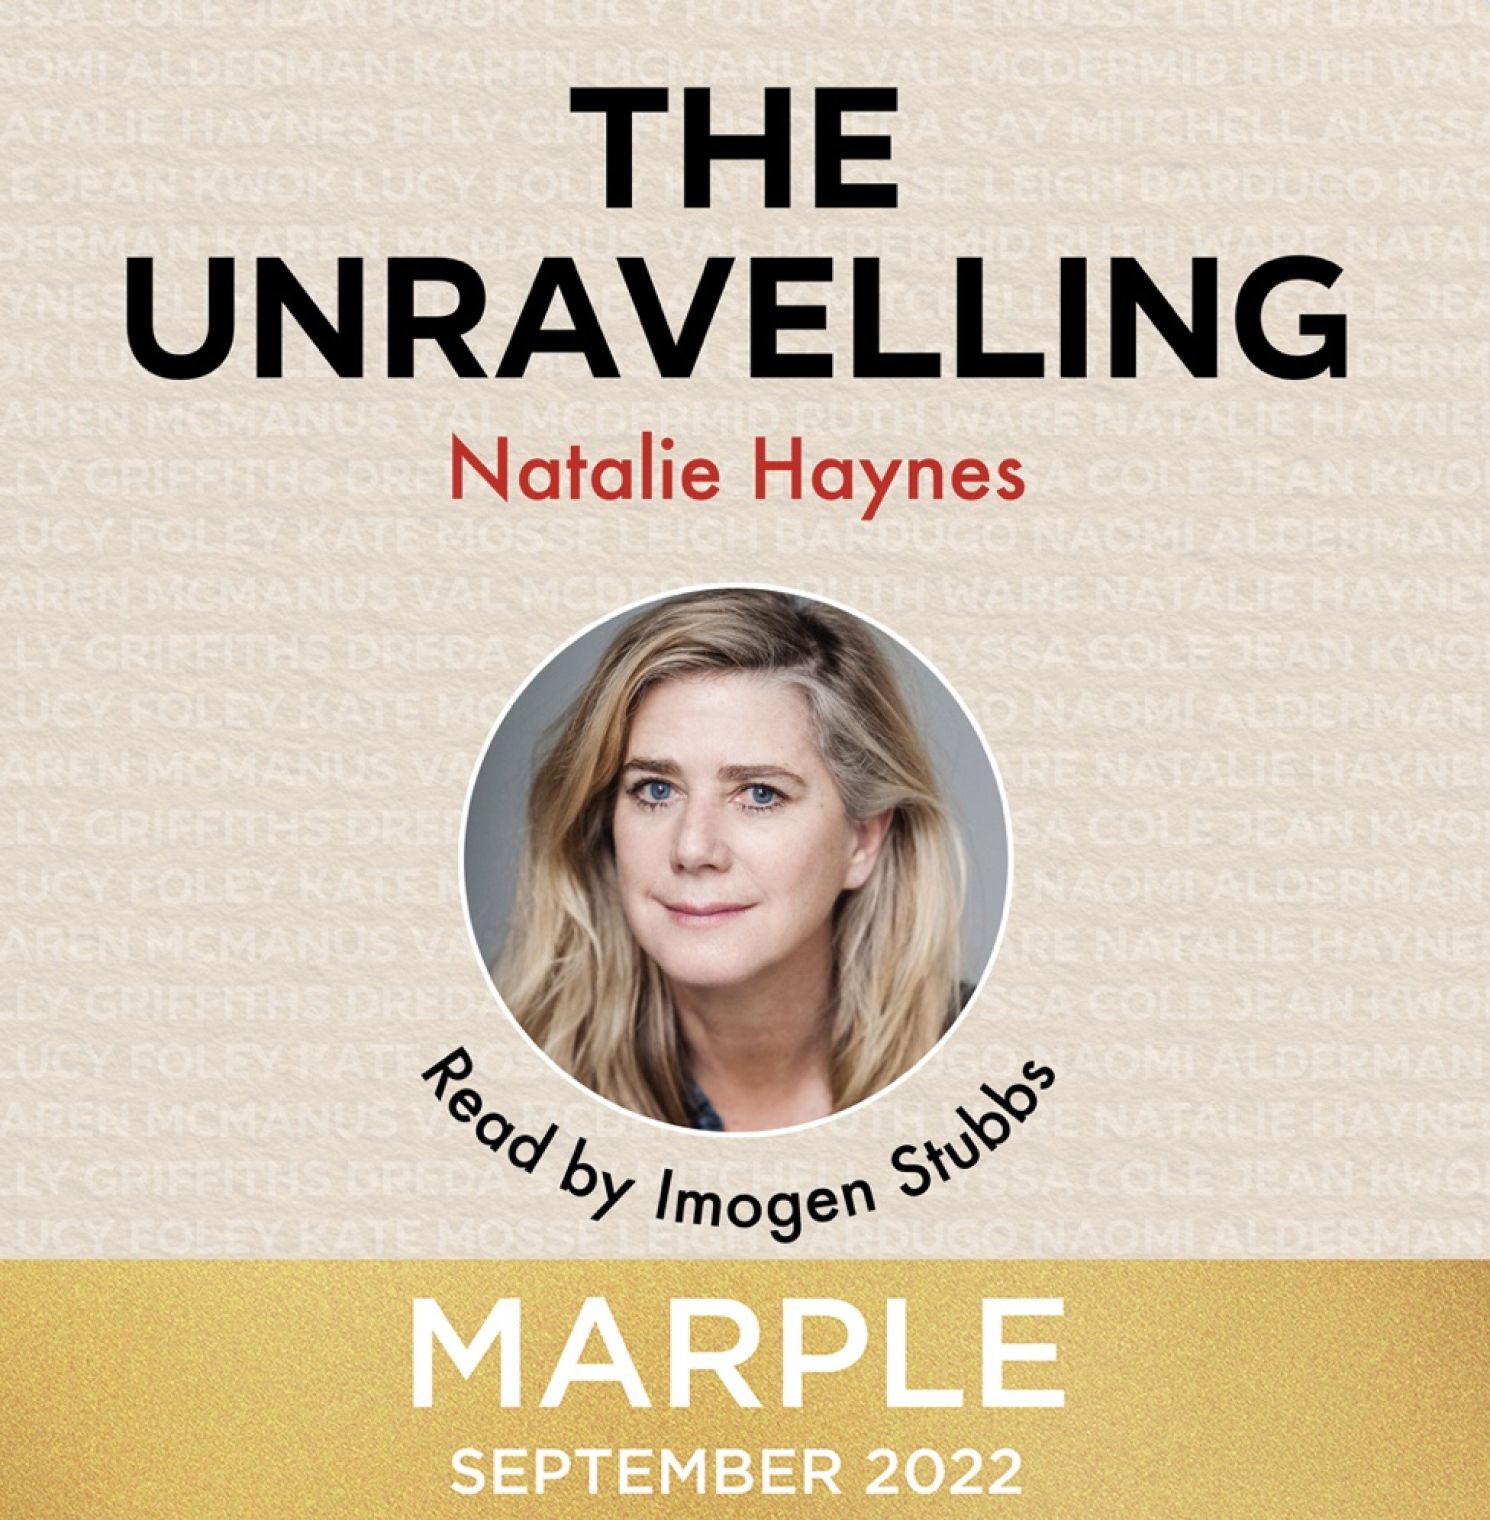 Imogen Stubbs narrates one of twelve short stories in the new 'Marple' detective series available as audiobooks from today